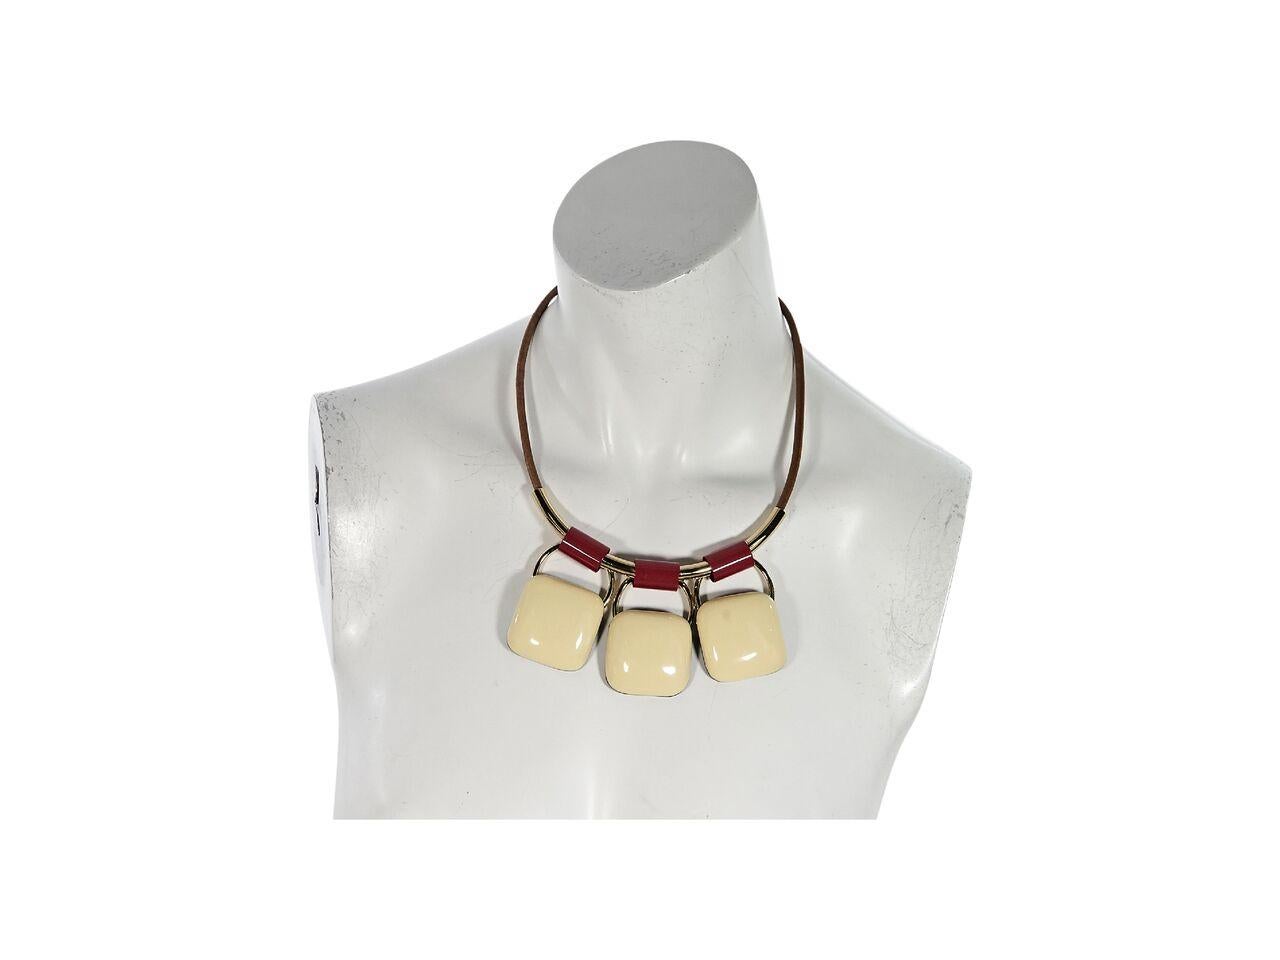 Product details:  Cream enamel pendant necklace by Marni.  Adjustable closure.  Leather string.  Goldtone and red hardware.  20